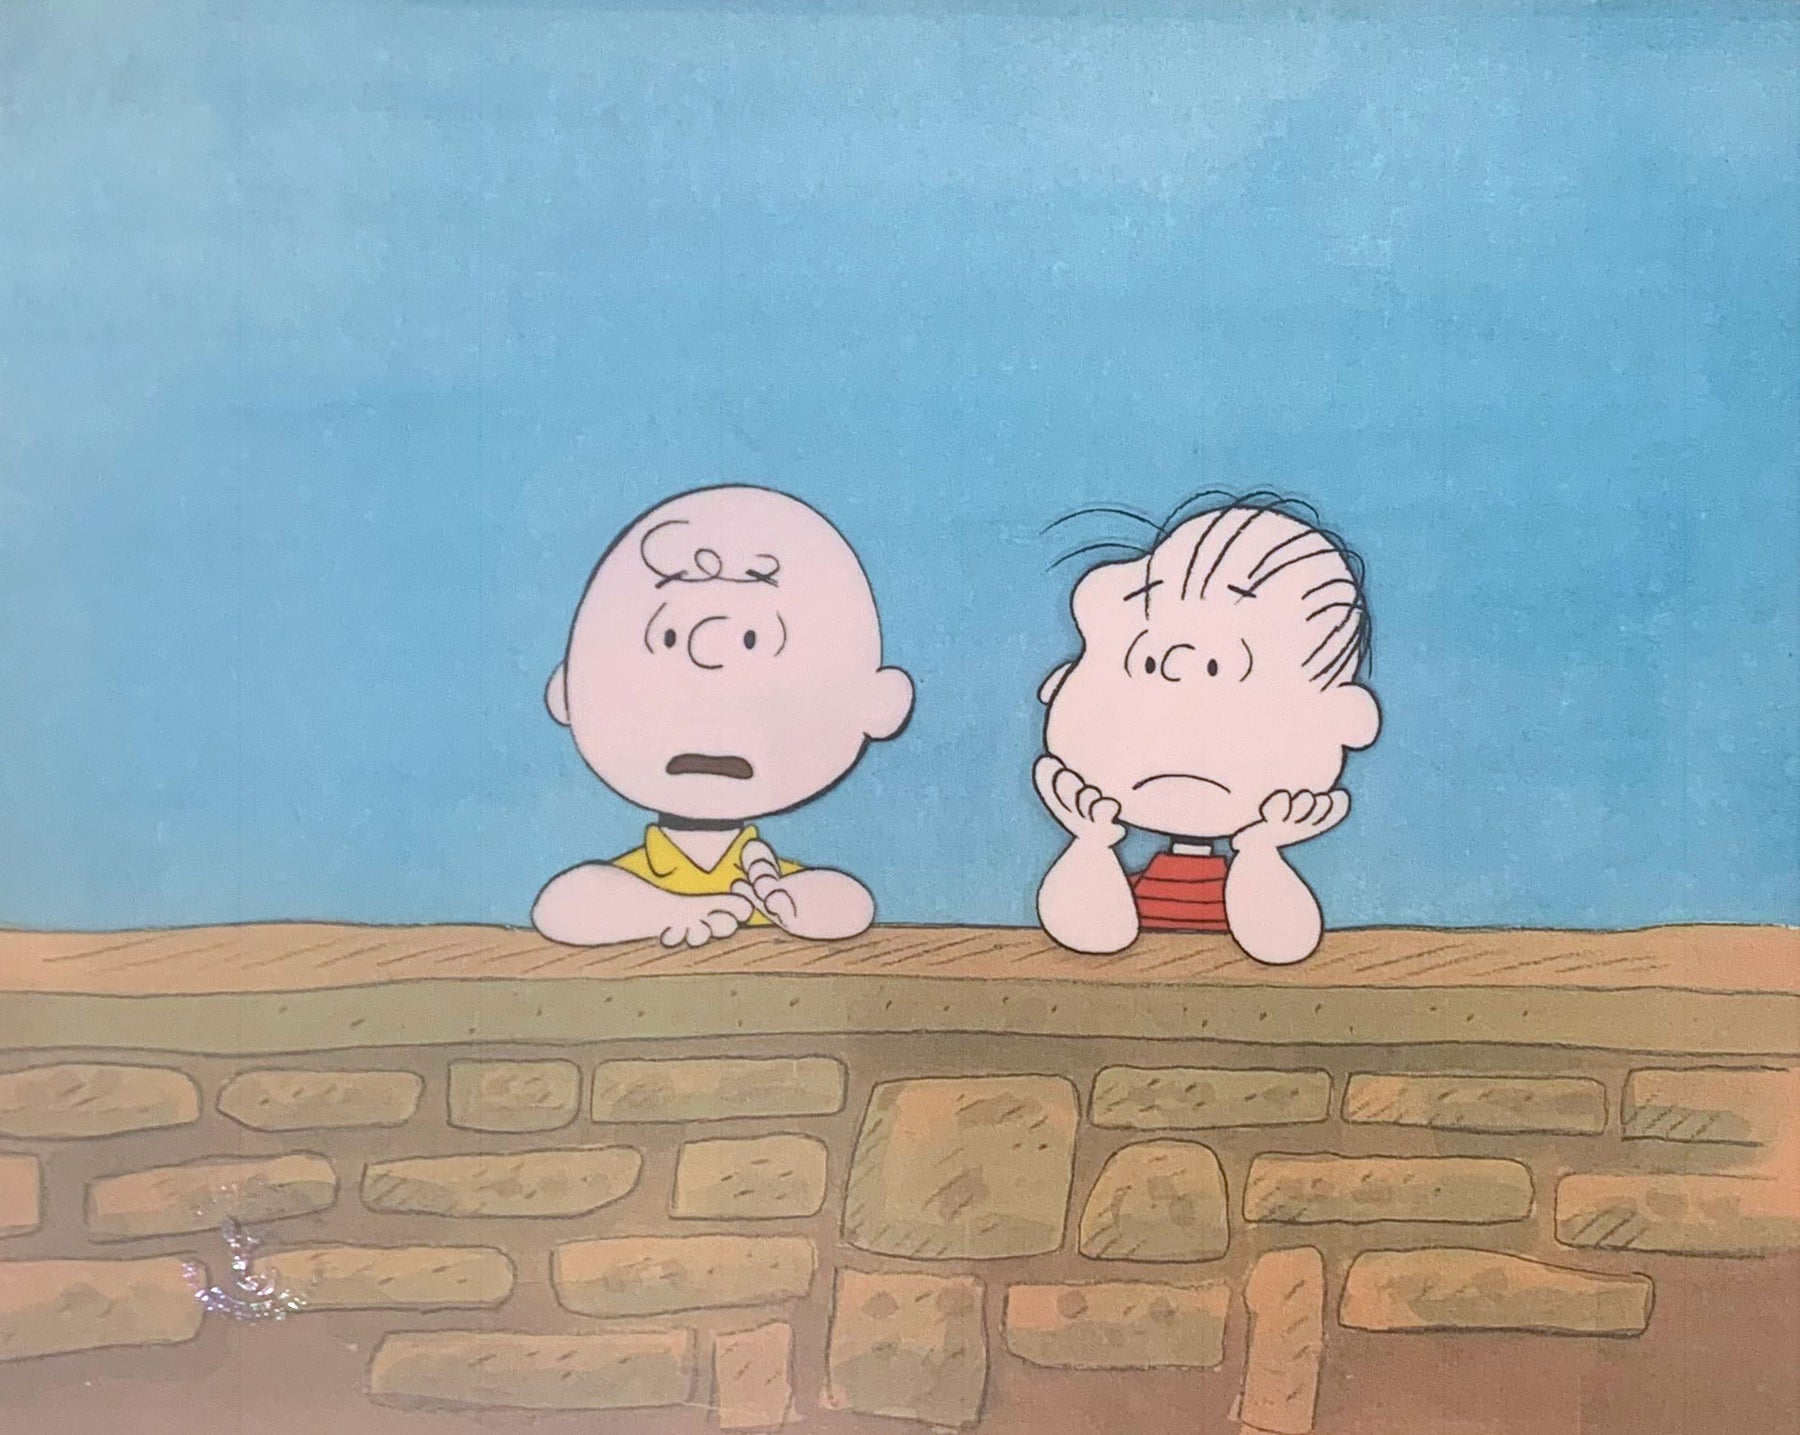 Original Peanuts Production Cel And Matching Production Drawing From The Charlie Brown And